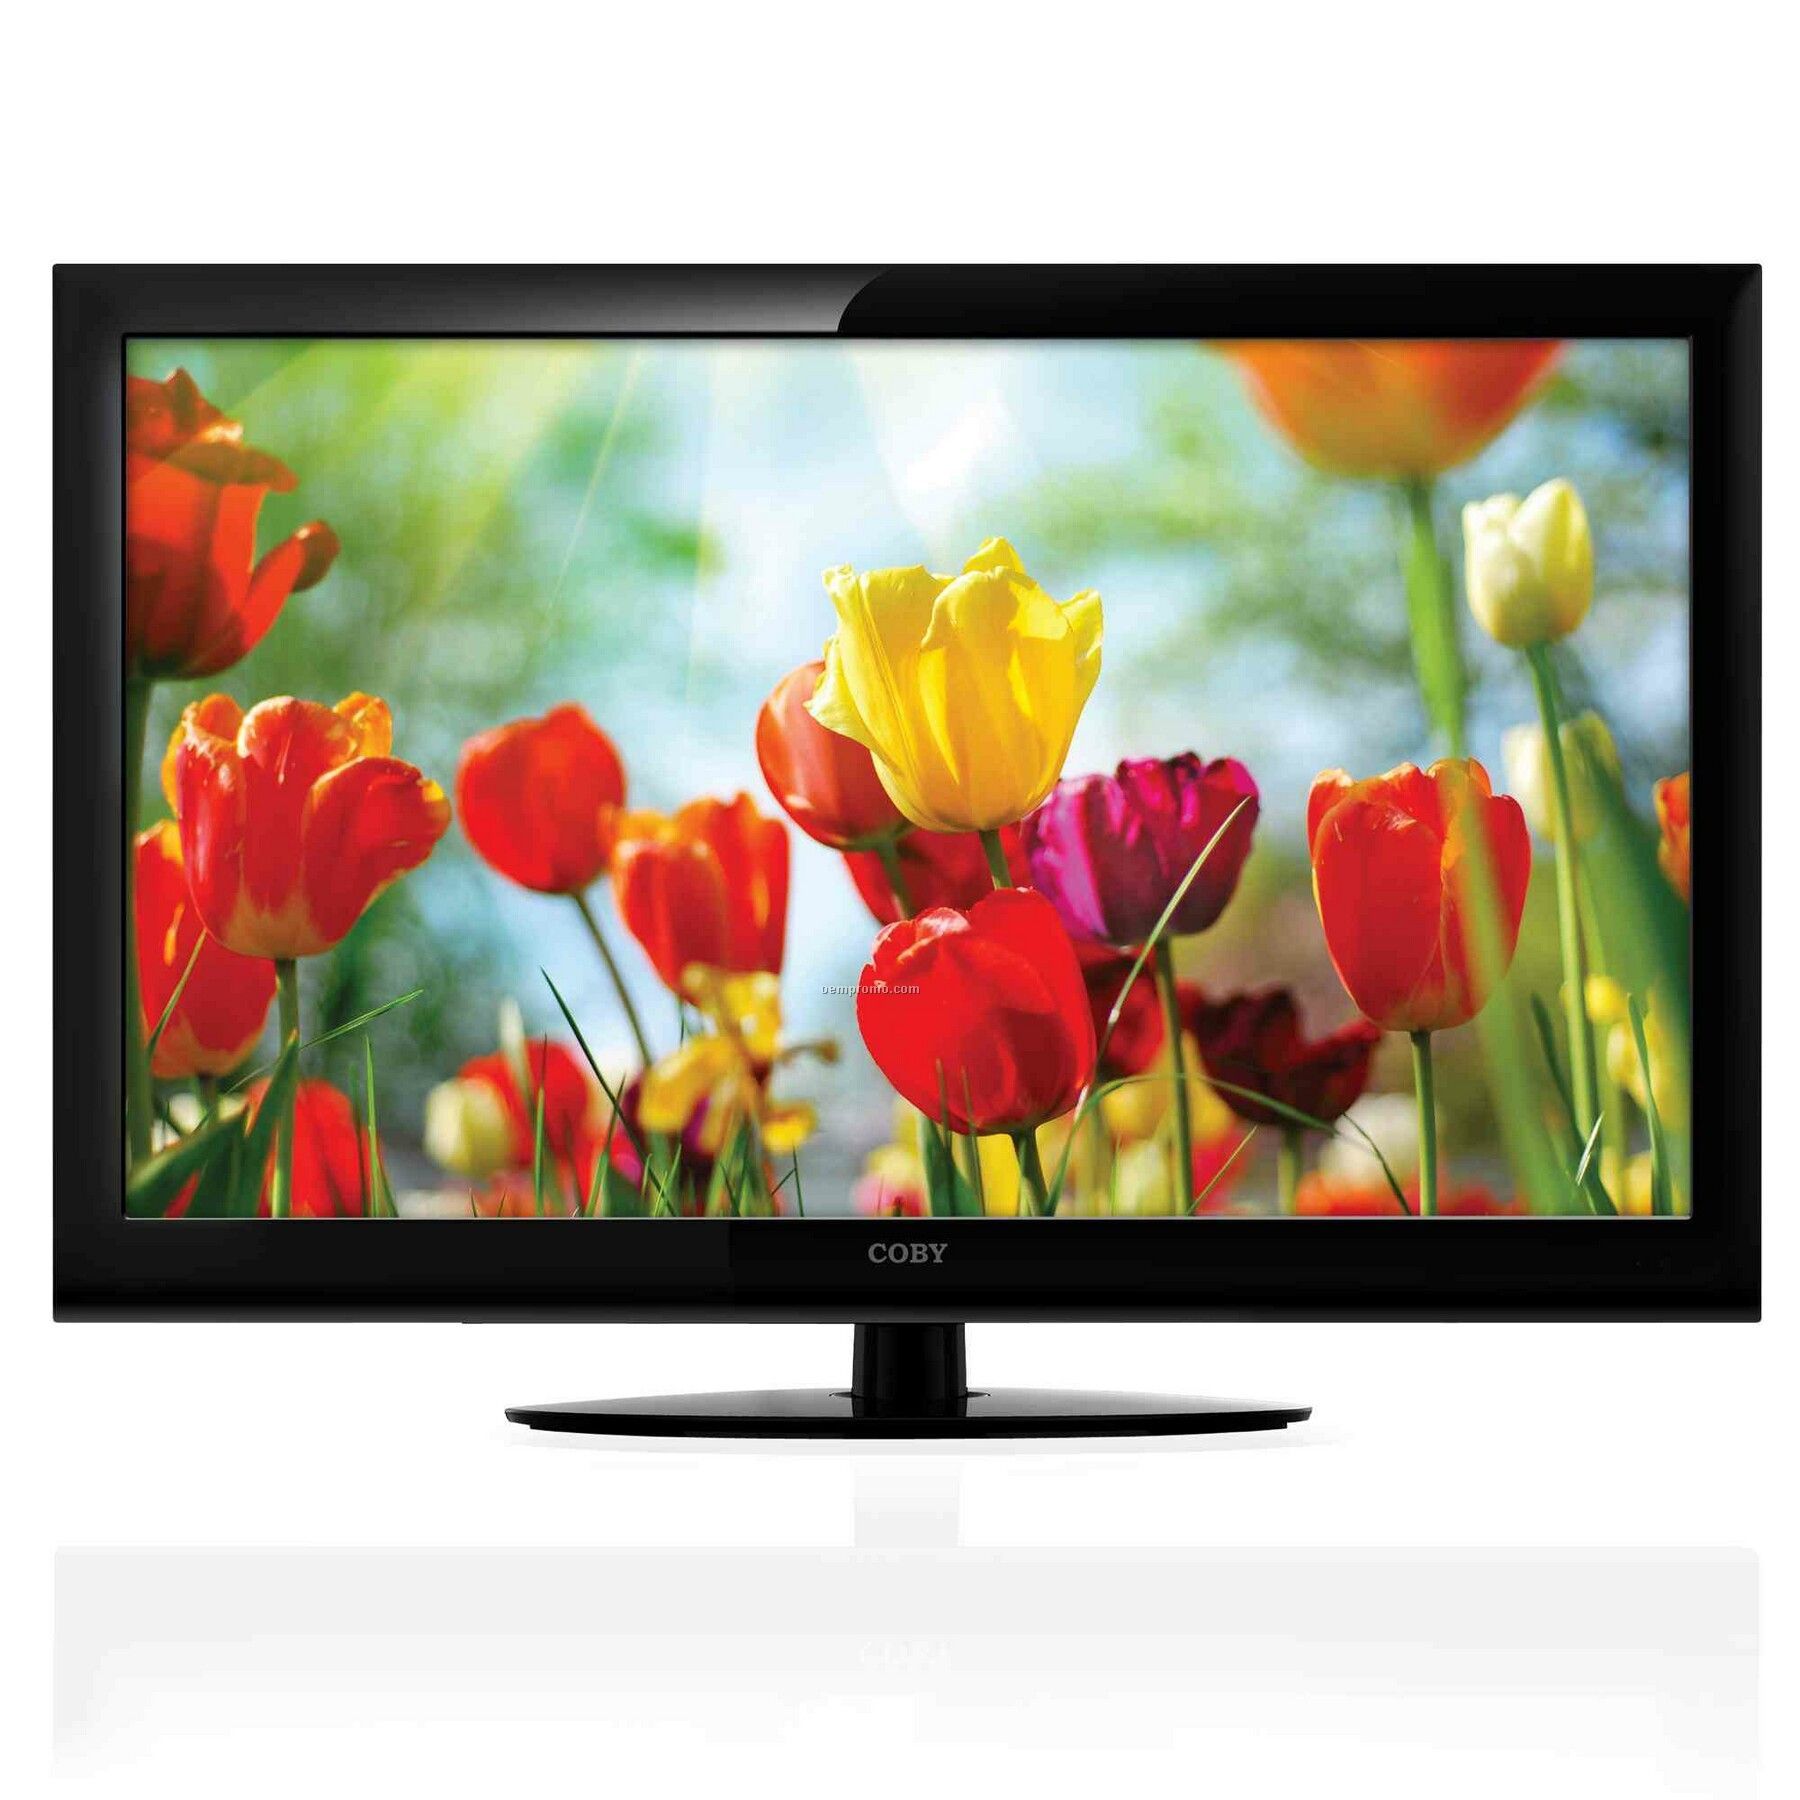 22" Class LED High-definition Tv